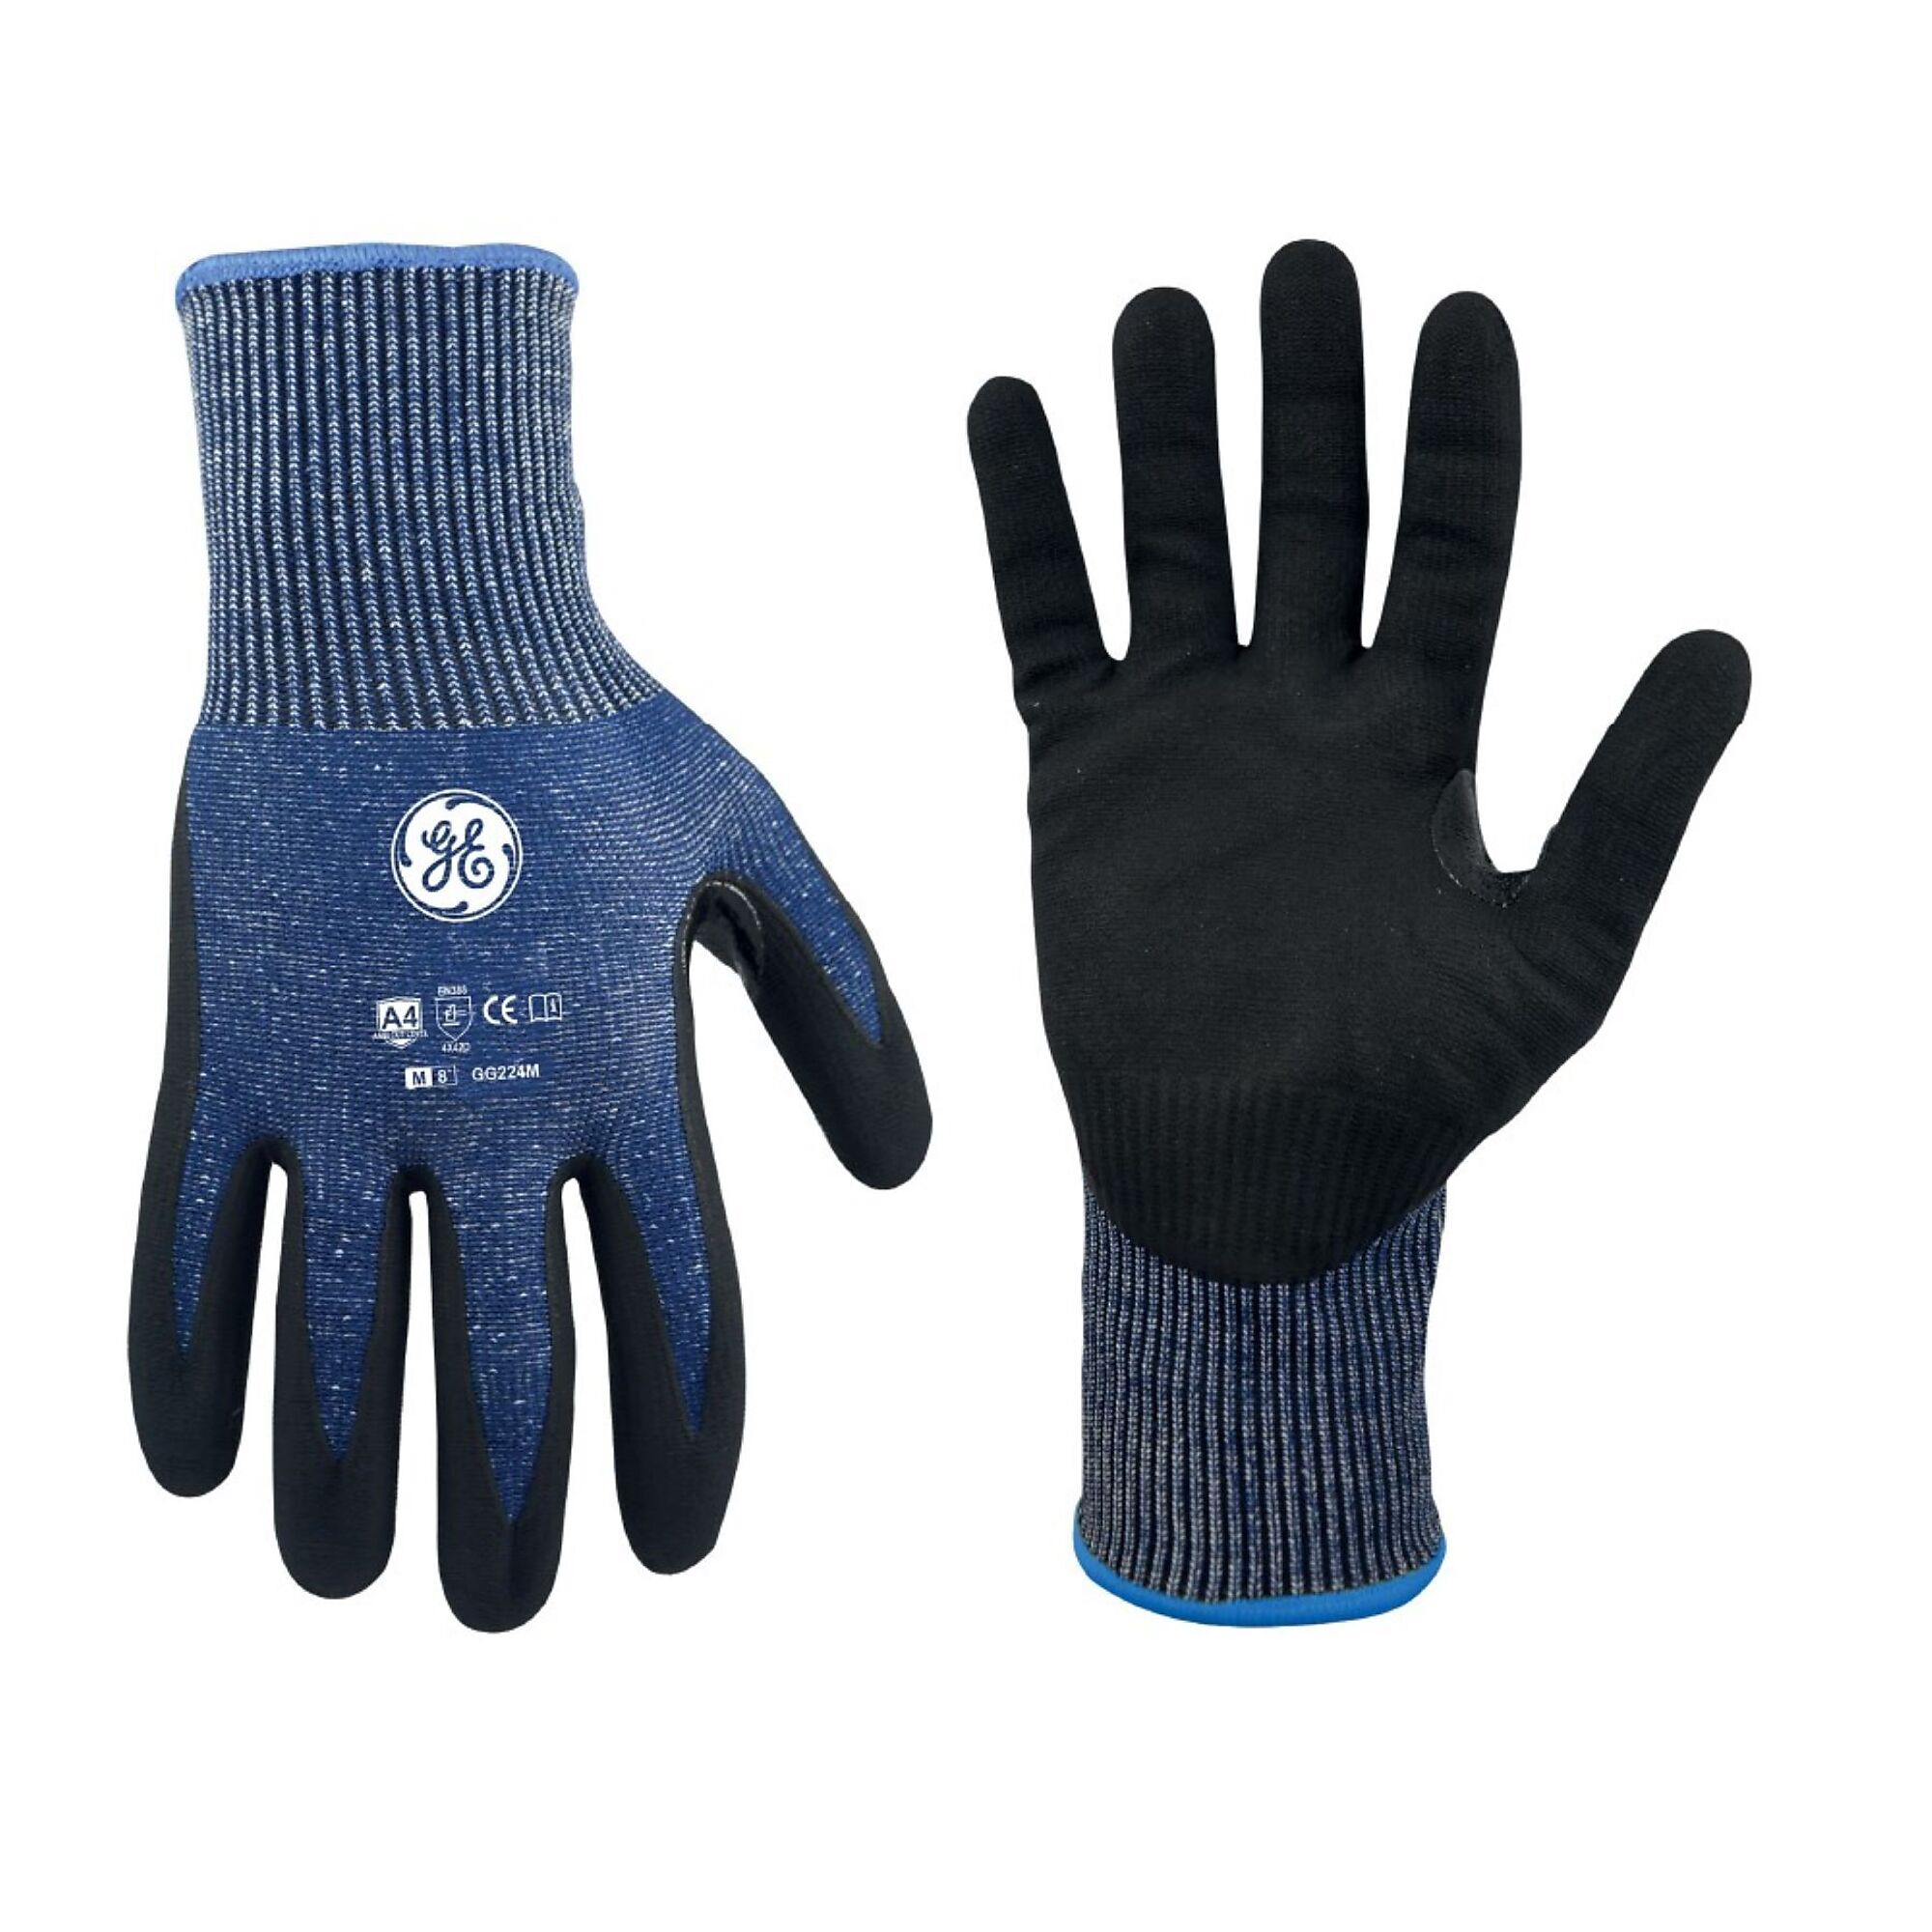 General Electric, Unisex Dipped Gloves Black/Blue M 12 pair, Size M, Included (qty.) 12, Model GG224M